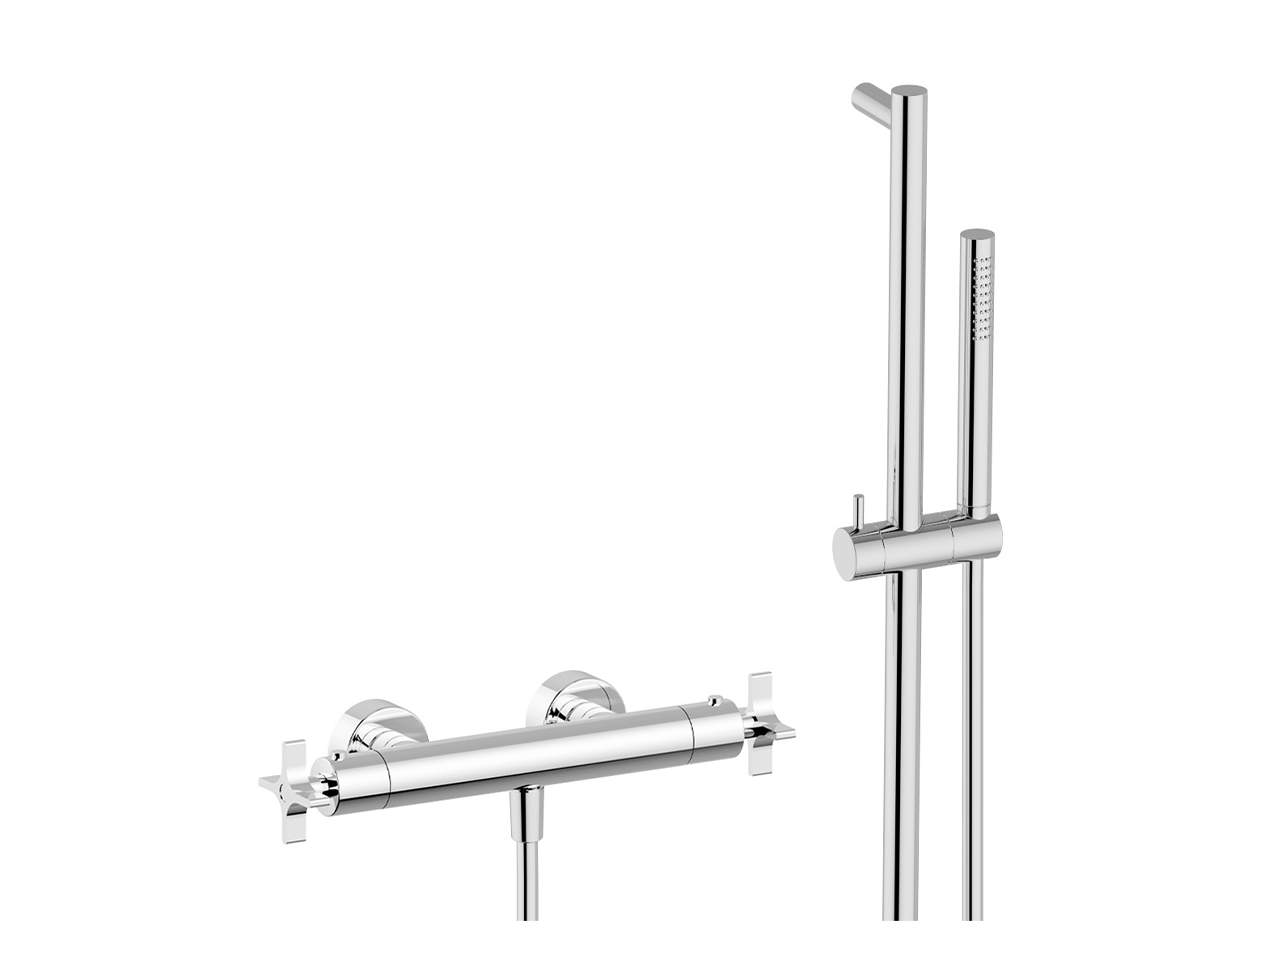 CisalThermostatic shower mixer with sliding bar GRACE_GSS01010